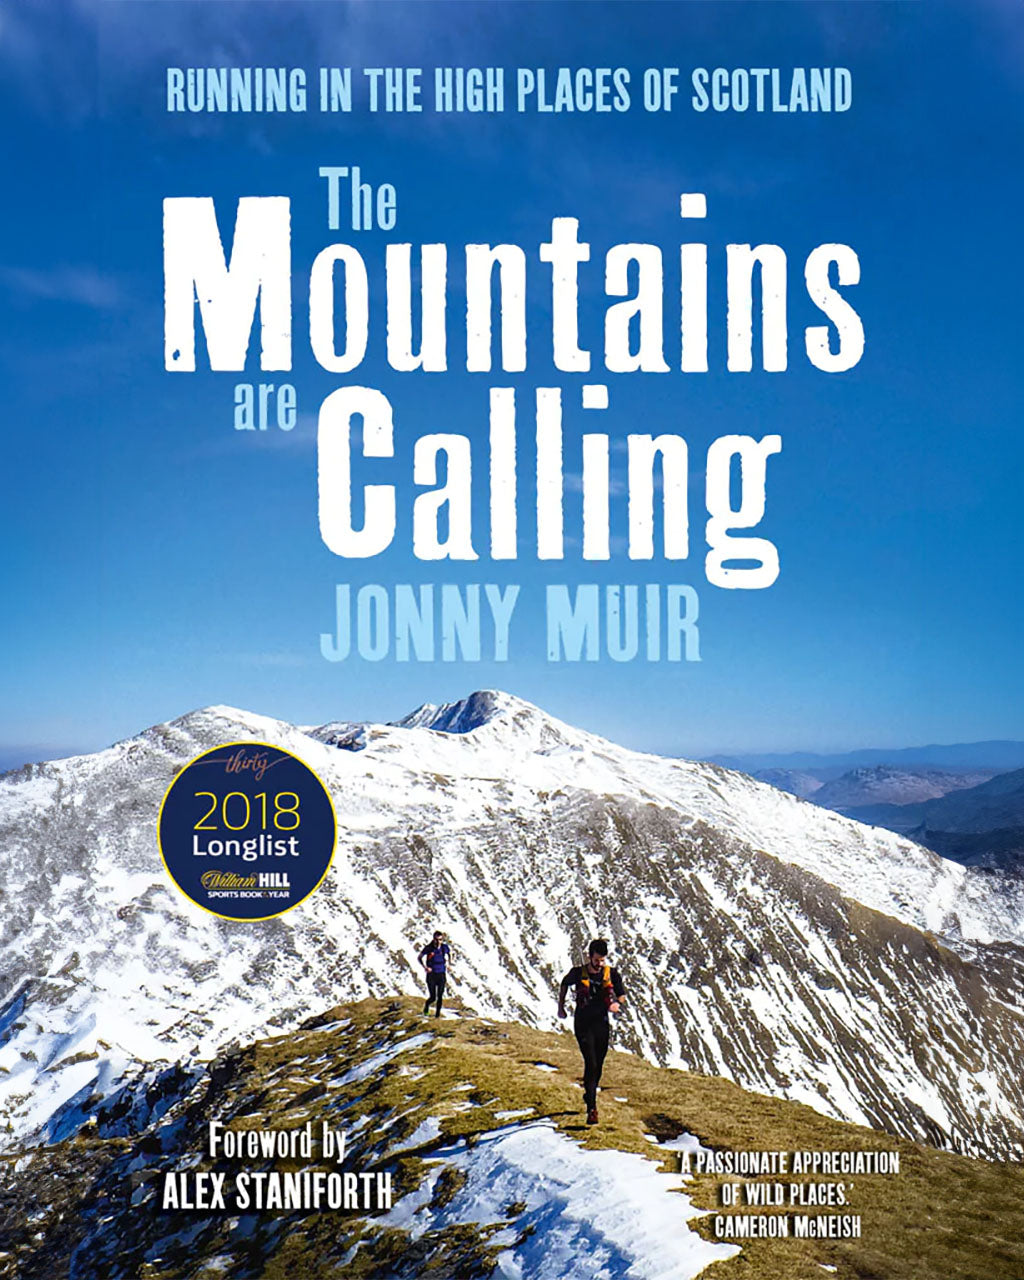 The Mountains Are Calling by Jonny Muir